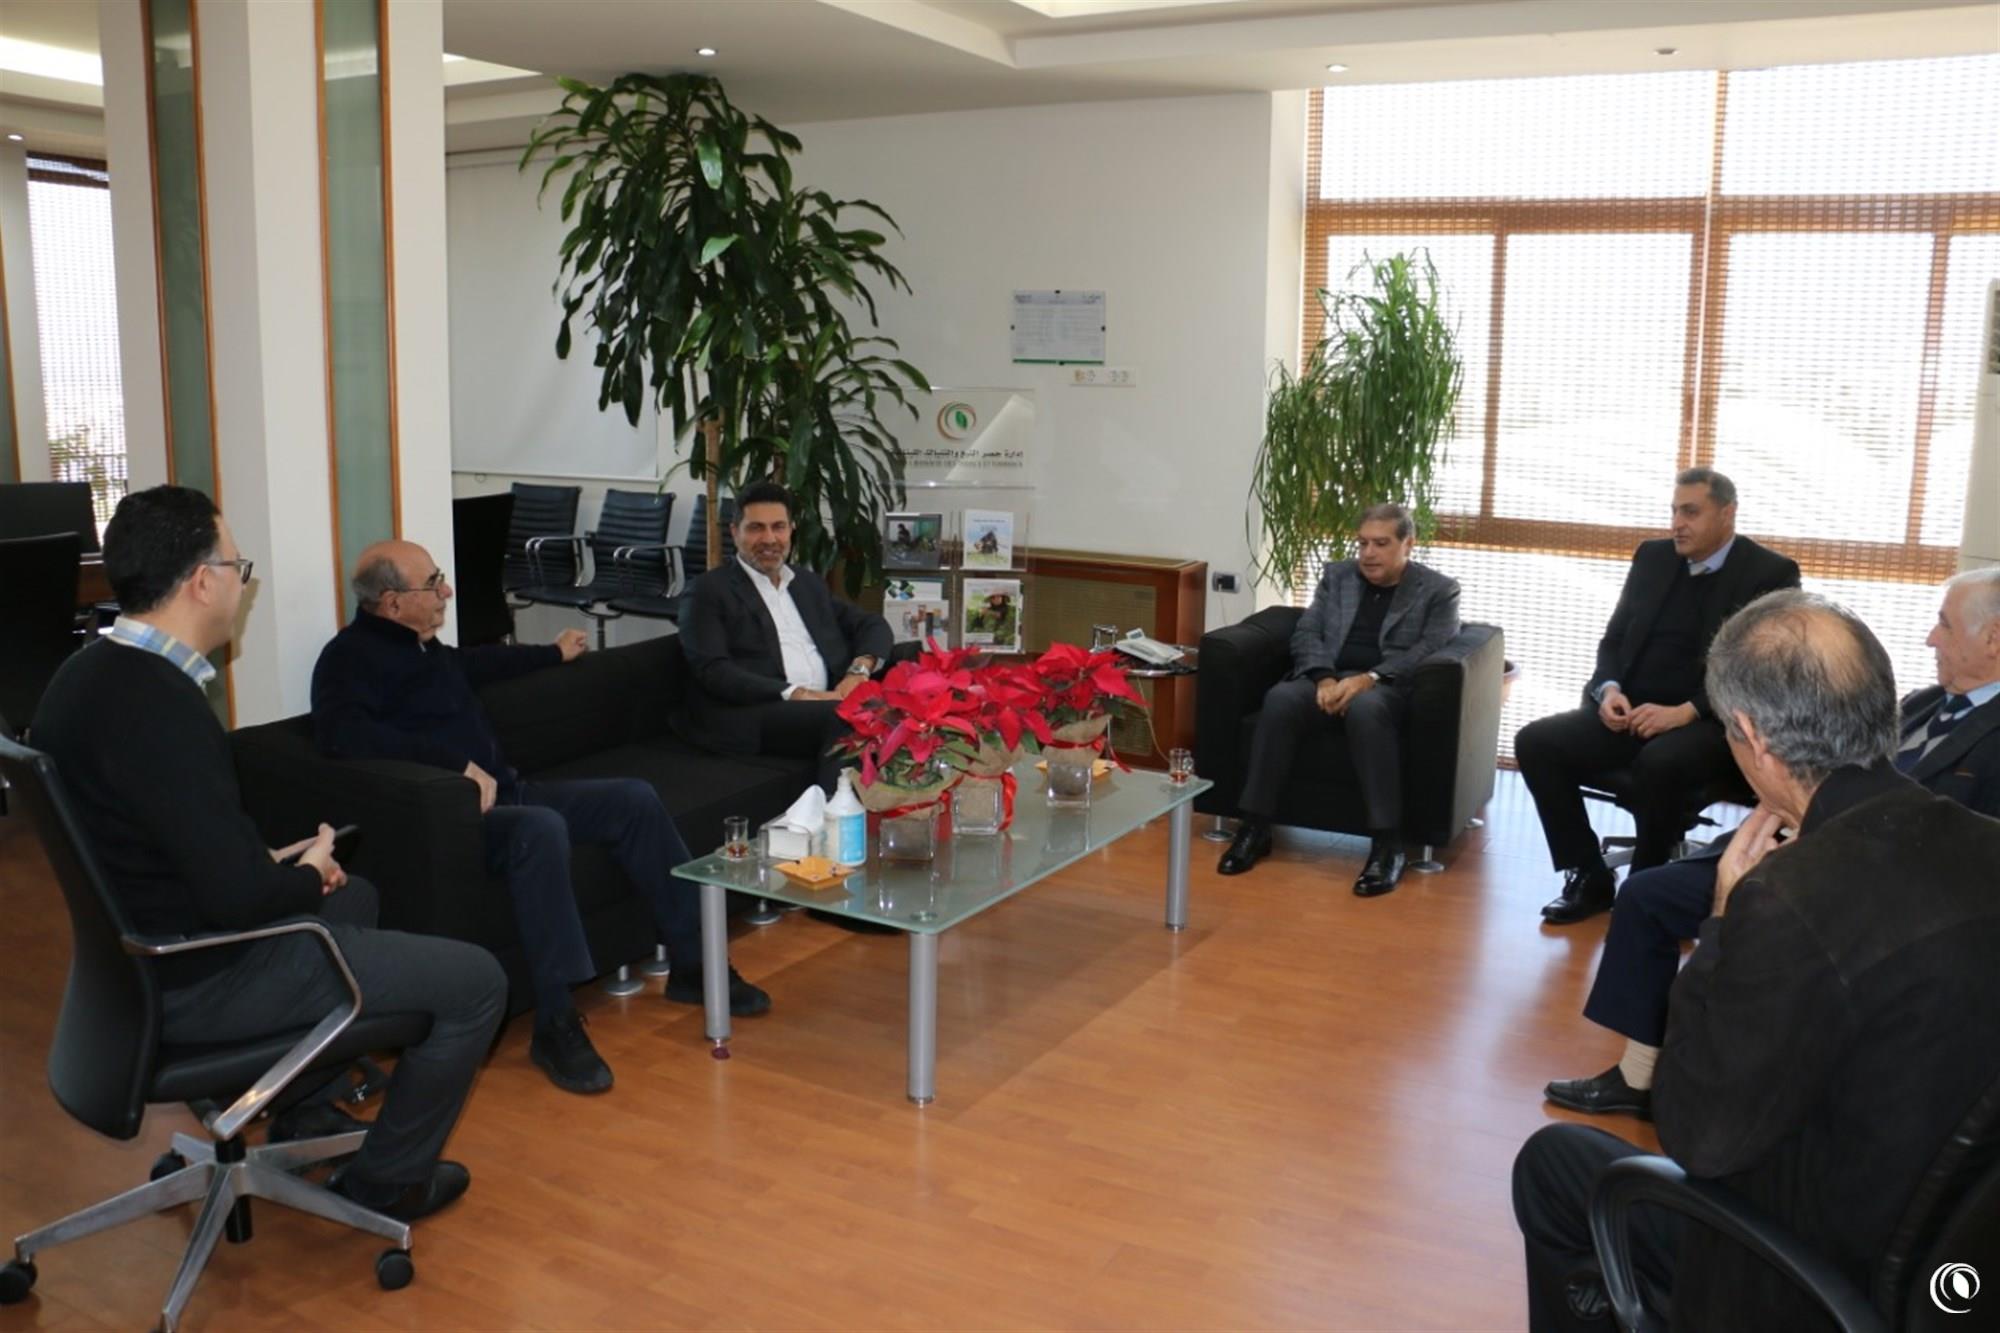 Minister Ghajar in a friendly visit to the Regie